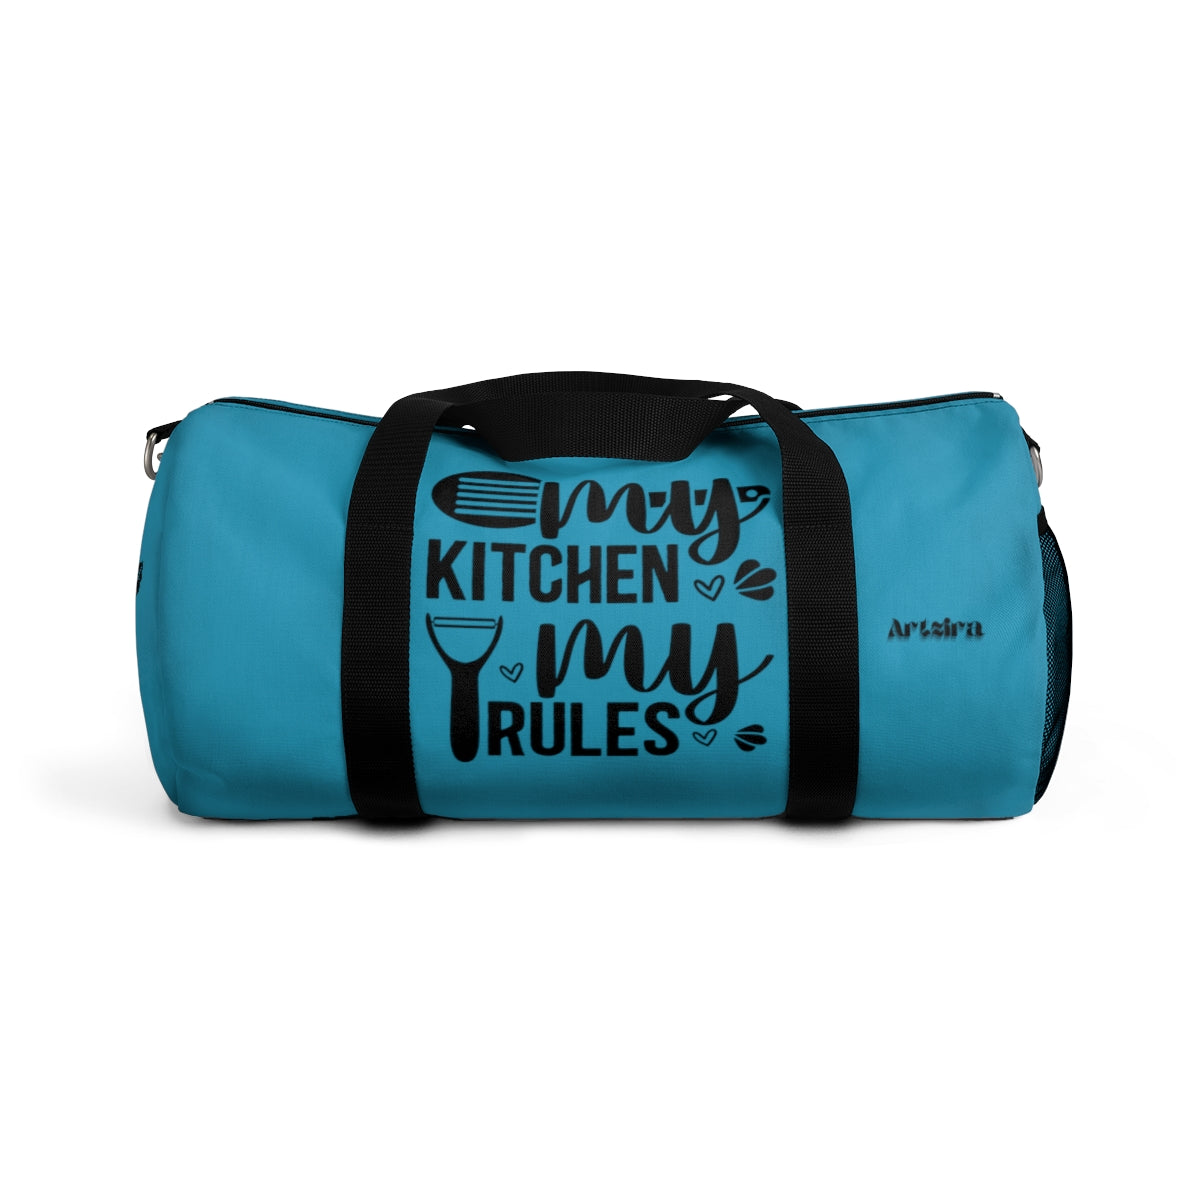 PERSONALISED CHEF DUFFLE Bag, Weekender Bag, Travel Carry On Bag for Chefs Gym Lovers | Artzira